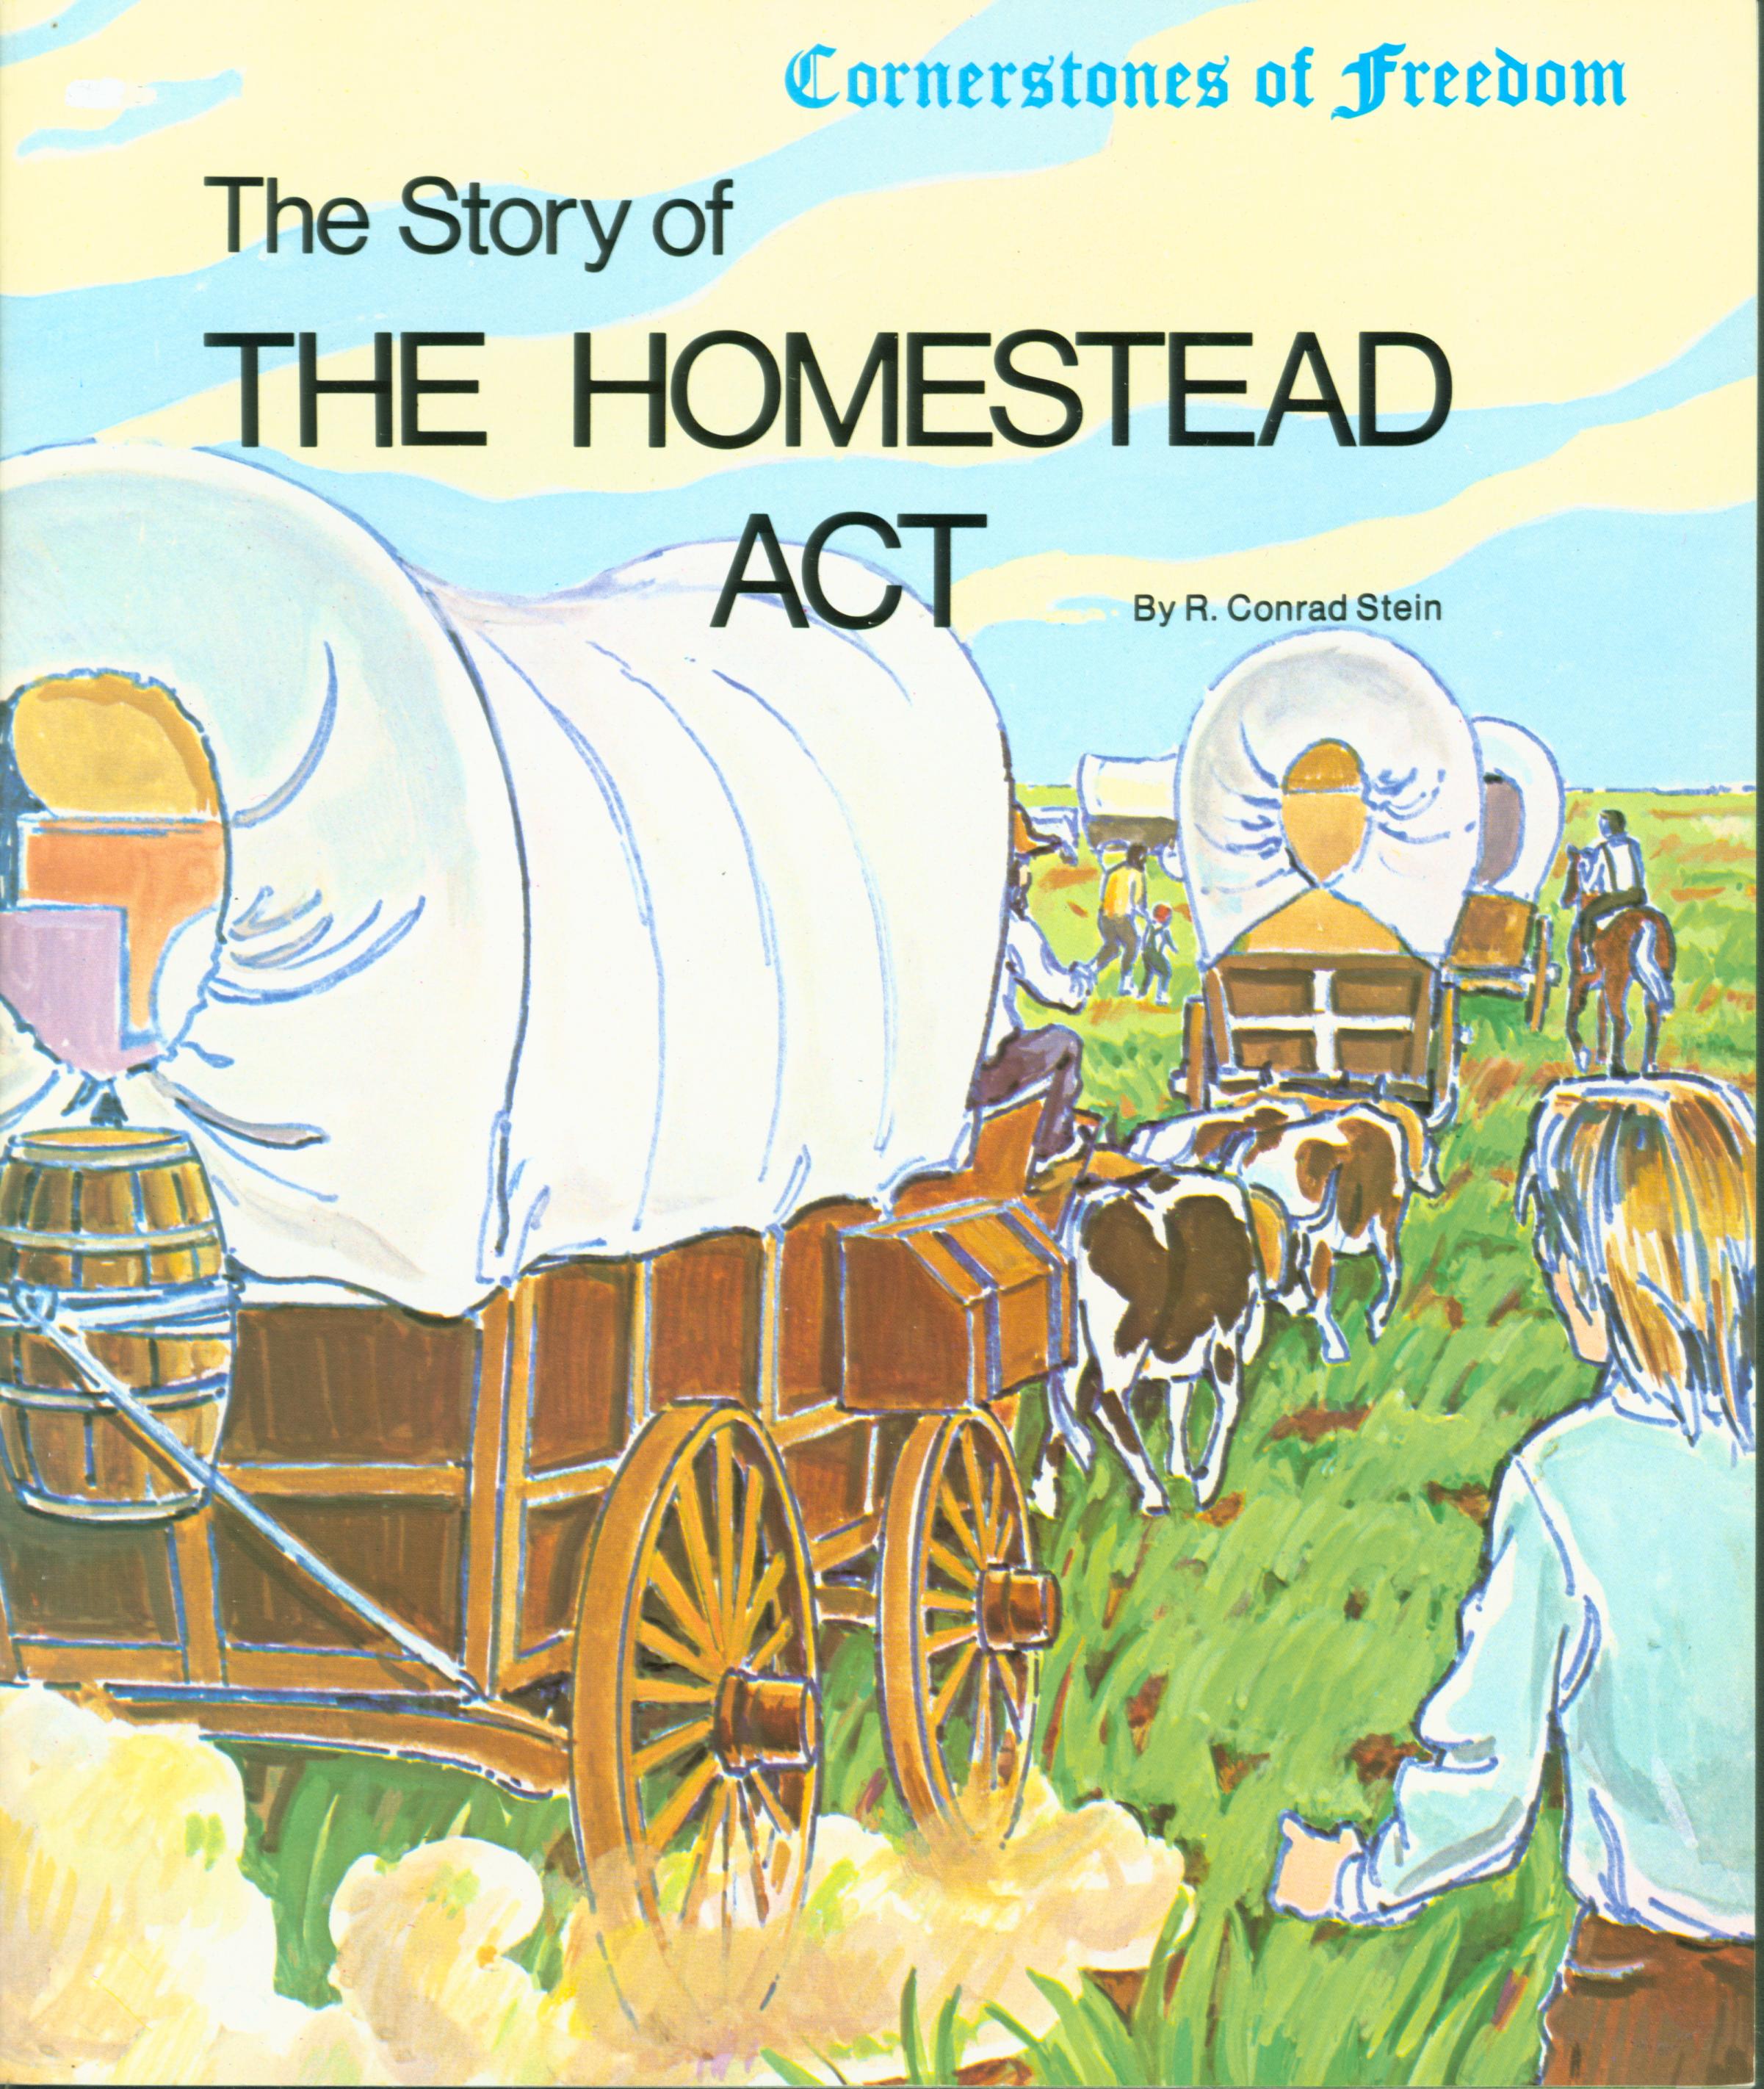 THE STORY OF THE HOMESTEAD ACT.